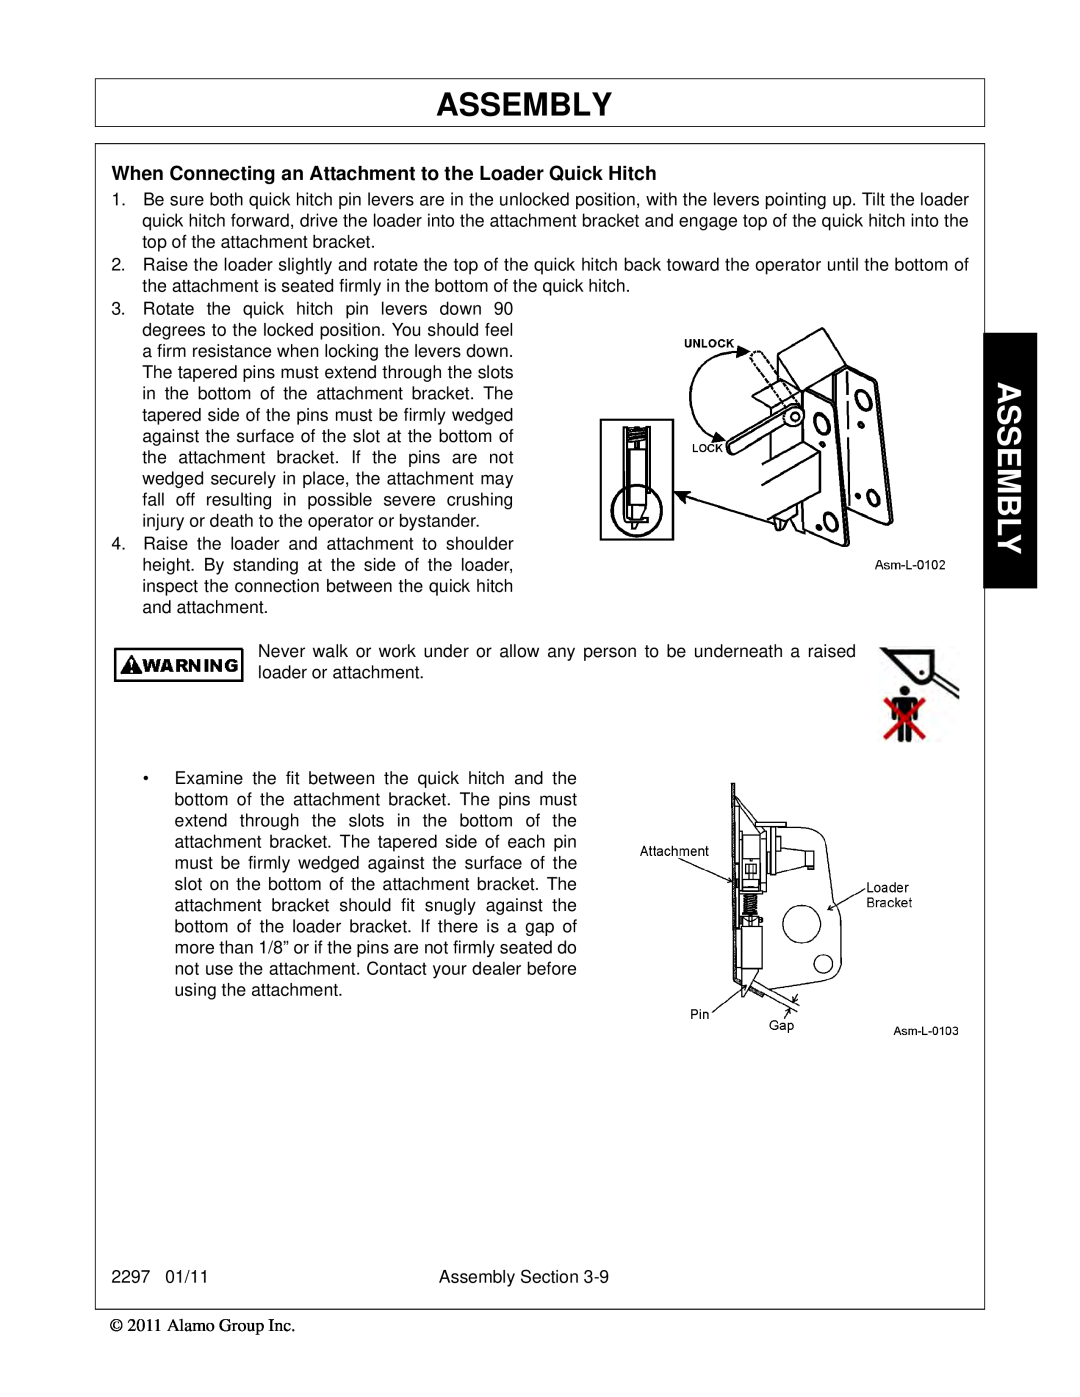 Bush Hog 2297 manual Assembly, When Connecting an Attachment to the Loader Quick Hitch 